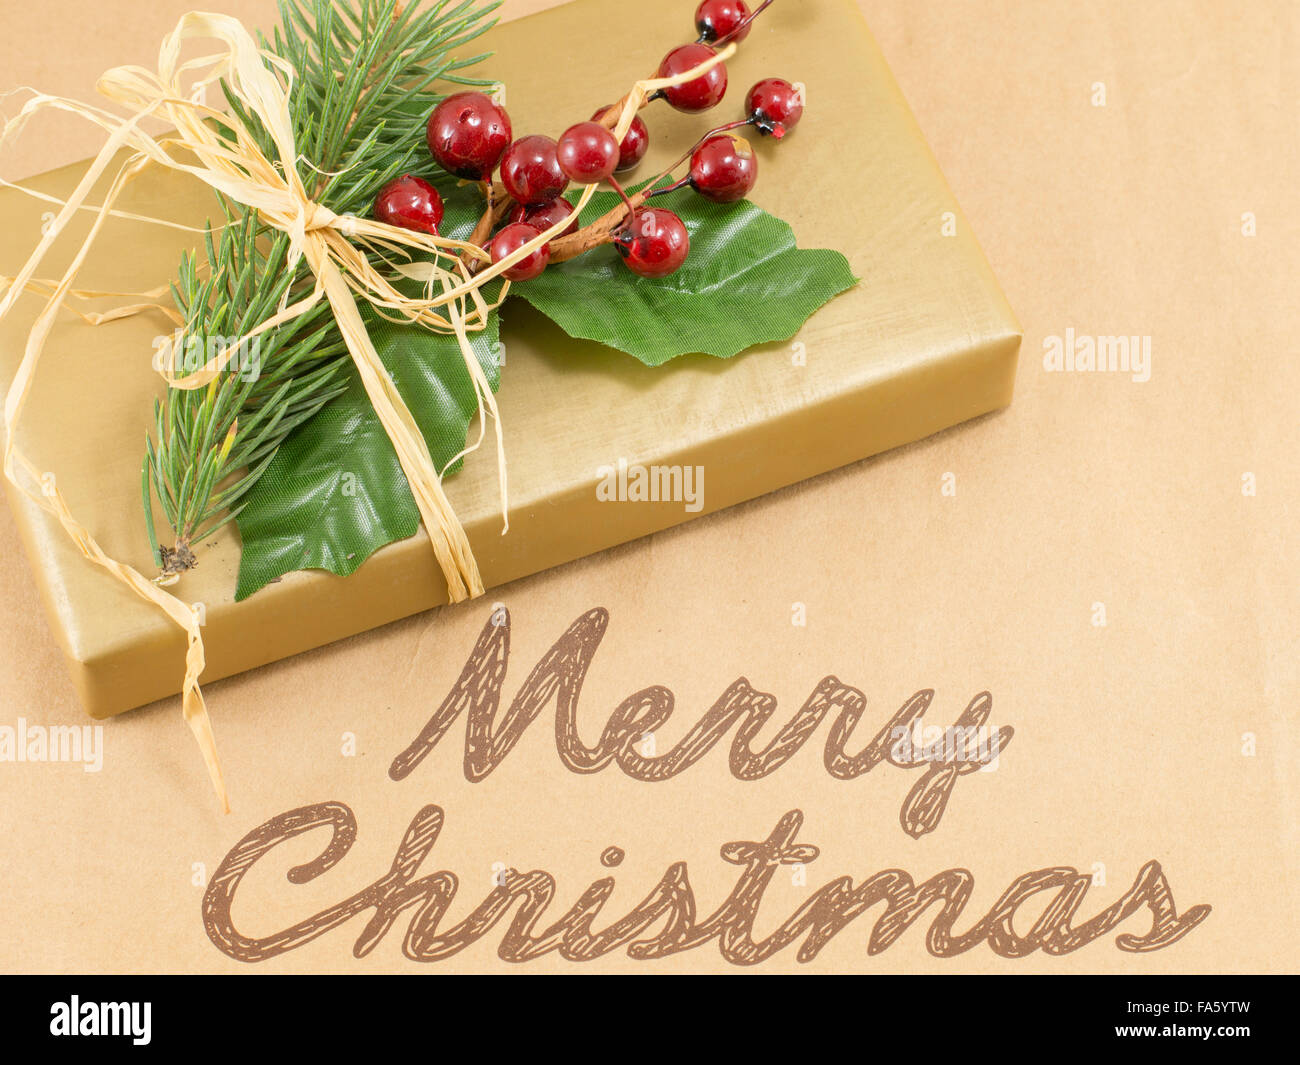 Merry Christmas card with mistletoe and present box Stock Photo